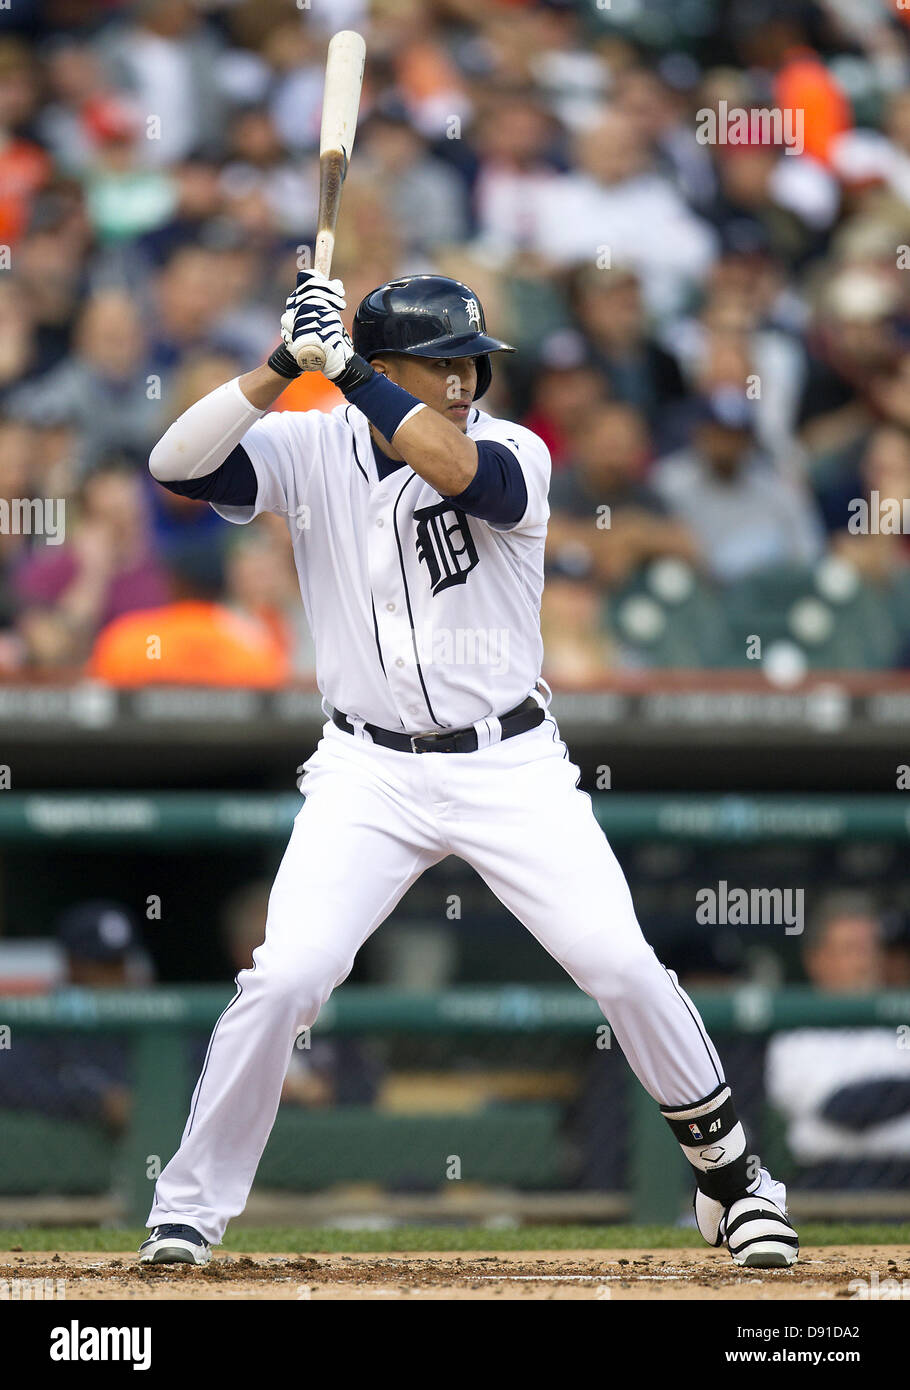 June 4, 2013 - Detroit, Michigan, United States of America - June 04, 2013: Detroit Tigers designated hitter Victor Martinez (41) at bat during MLB game action between the Tampa Bay Rays and the Detroit Tigers at Comerica Park in Detroit, Michigan. The Tigers defeated the Rays 10-1. Stock Photo